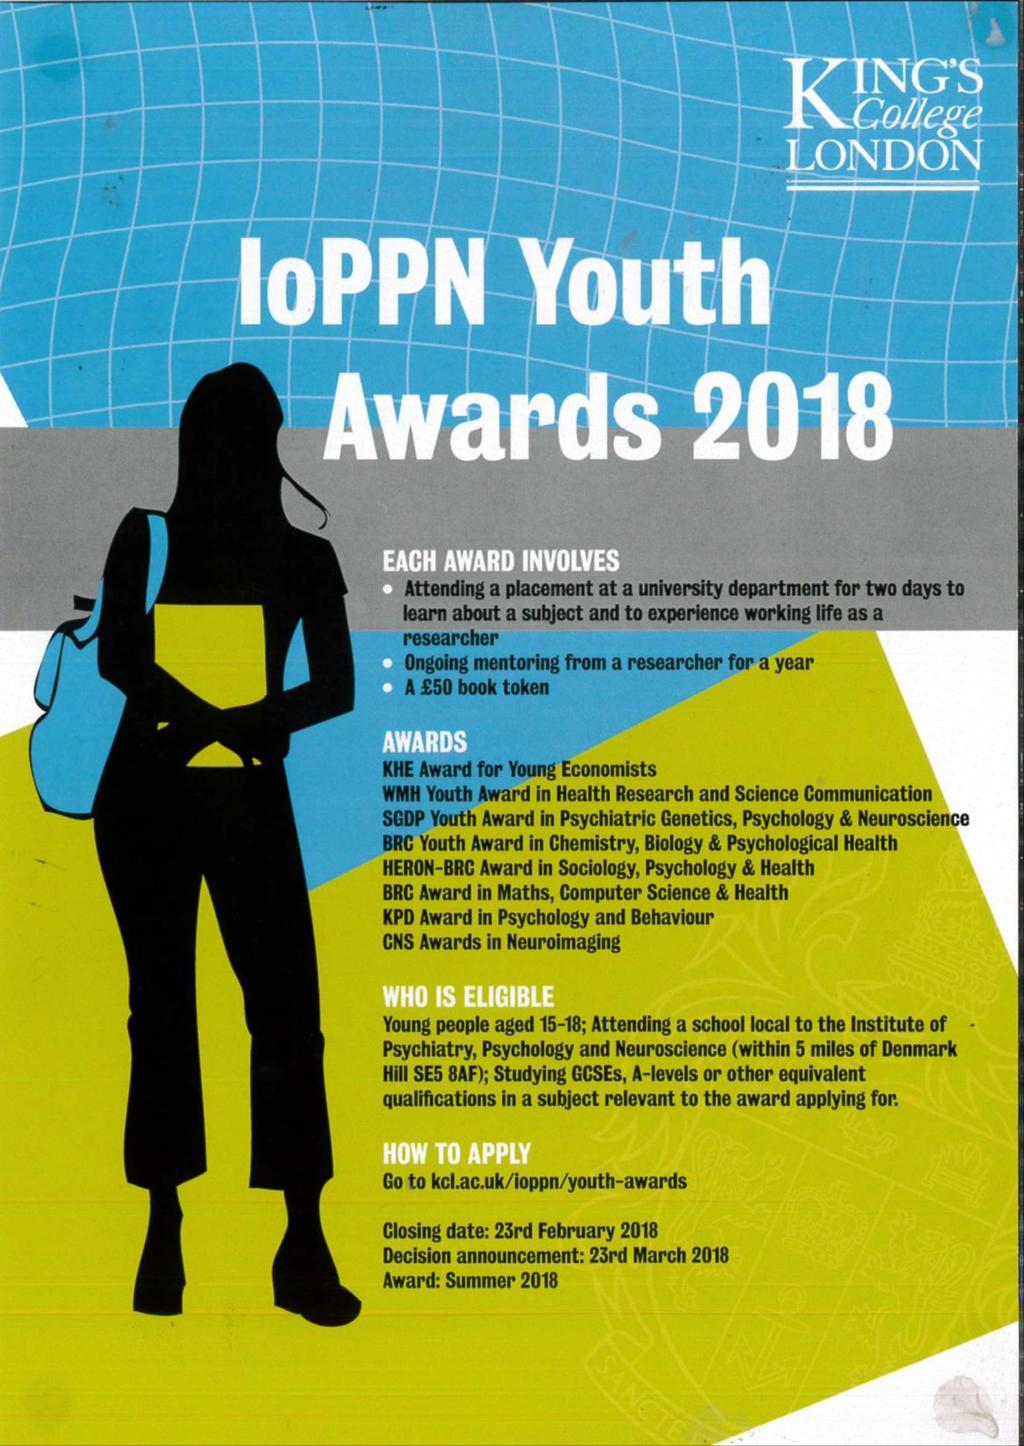 Lunchtime Lectures Interested in applying for an IoPPN Youth Award? Why not come along to find out more? When? Tuesday 30 January 12.45-1.15pm (Bring a packed lunch) Where? Room 214/215 Who?